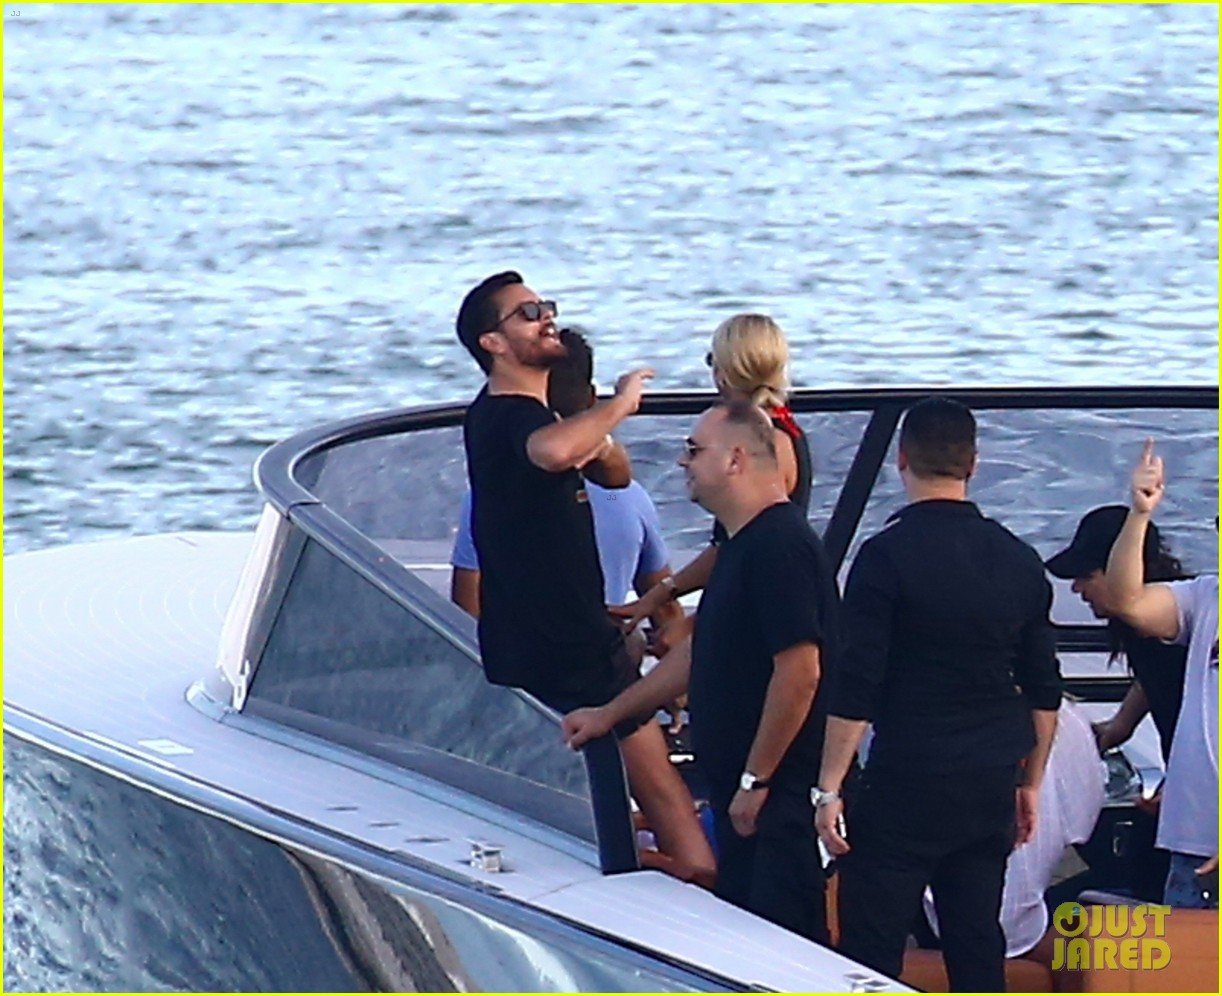 scott disick and sofia richie flaunt pda on a boat with friends2 52